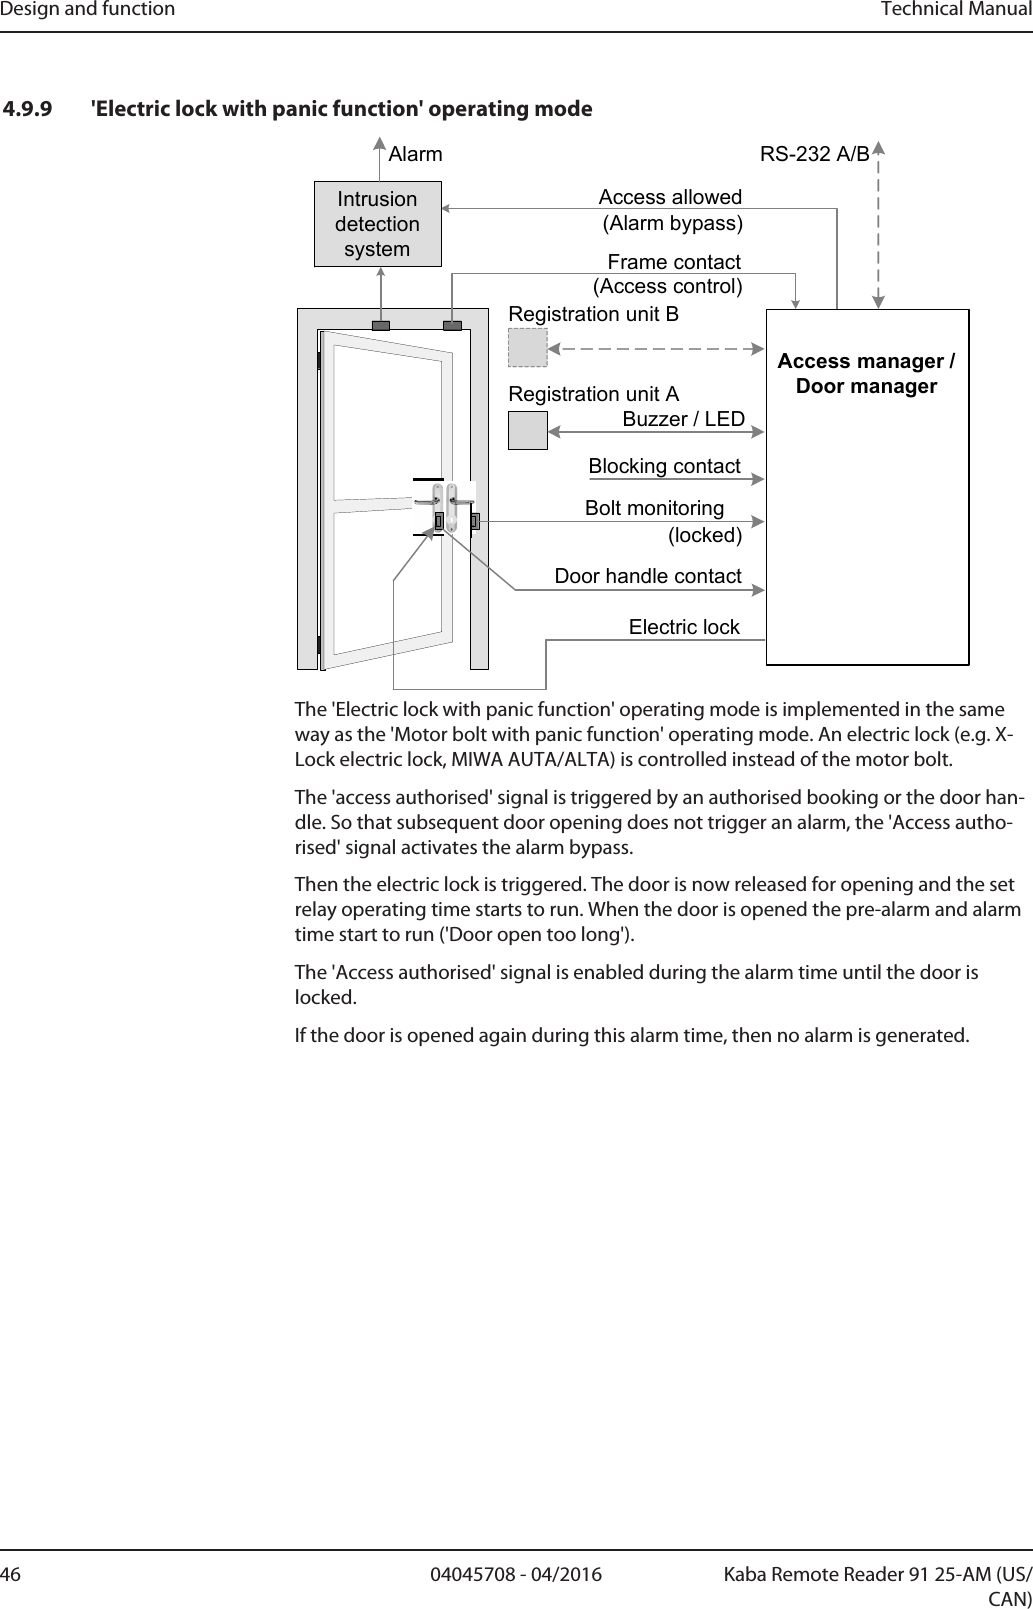 Design and function Technical Manual46 04045708 - 04/2016 Kaba Remote Reader 91 25-AM (US/CAN)4.9.9 &apos;Electric lock with panic function&apos; operating mode(locked)RS-232 A/BBuzzer / LEDElectric lockBolt monitoringAccess allowedFrame contact(Alarm bypass)(Access control)Registration unit ABlocking contactRegistration unit BDoor handle contactIntrusion detection systemAlarmAccess manager /Door managerThe &apos;Electric lock with panic function&apos; operating mode is implemented in the sameway as the &apos;Motor bolt with panic function&apos; operating mode. An electric lock (e.g. X-Lock electric lock, MIWA AUTA/ALTA) is controlled instead of the motor bolt.The &apos;access authorised&apos; signal is triggered by an authorised booking or the door han-dle. So that subsequent door opening does not trigger an alarm, the &apos;Access autho-rised&apos; signal activates the alarm bypass.Then the electric lock is triggered. The door is now released for opening and the setrelay operating time starts to run. When the door is opened the pre-alarm and alarmtime start to run (&apos;Door open too long&apos;).The &apos;Access authorised&apos; signal is enabled during the alarm time until the door islocked.If the door is opened again during this alarm time, then no alarm is generated.